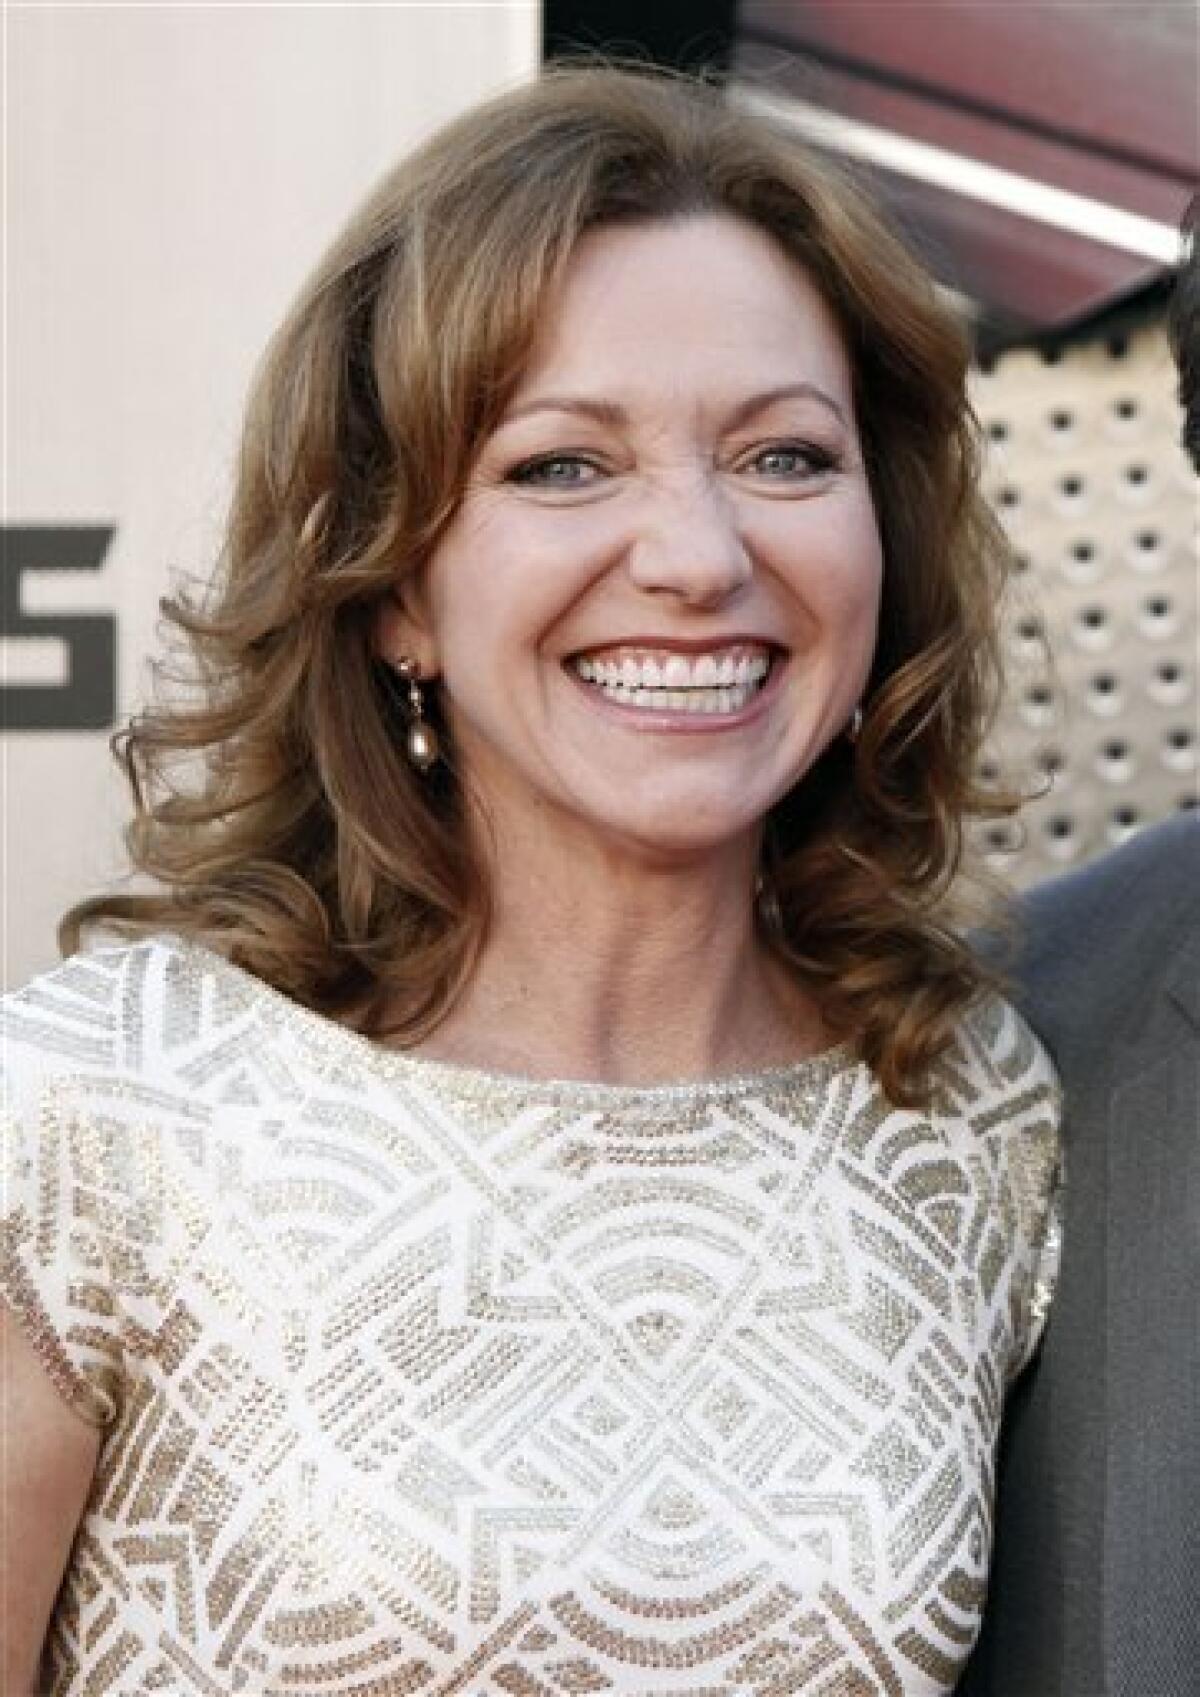 FILE - In this June 22, 2009 file photo, actress Julie White arrives to the premiere of "Transformers: Revenge of the Fallen" in Los Angeles. (AP Photo/Matt Sayles, file)